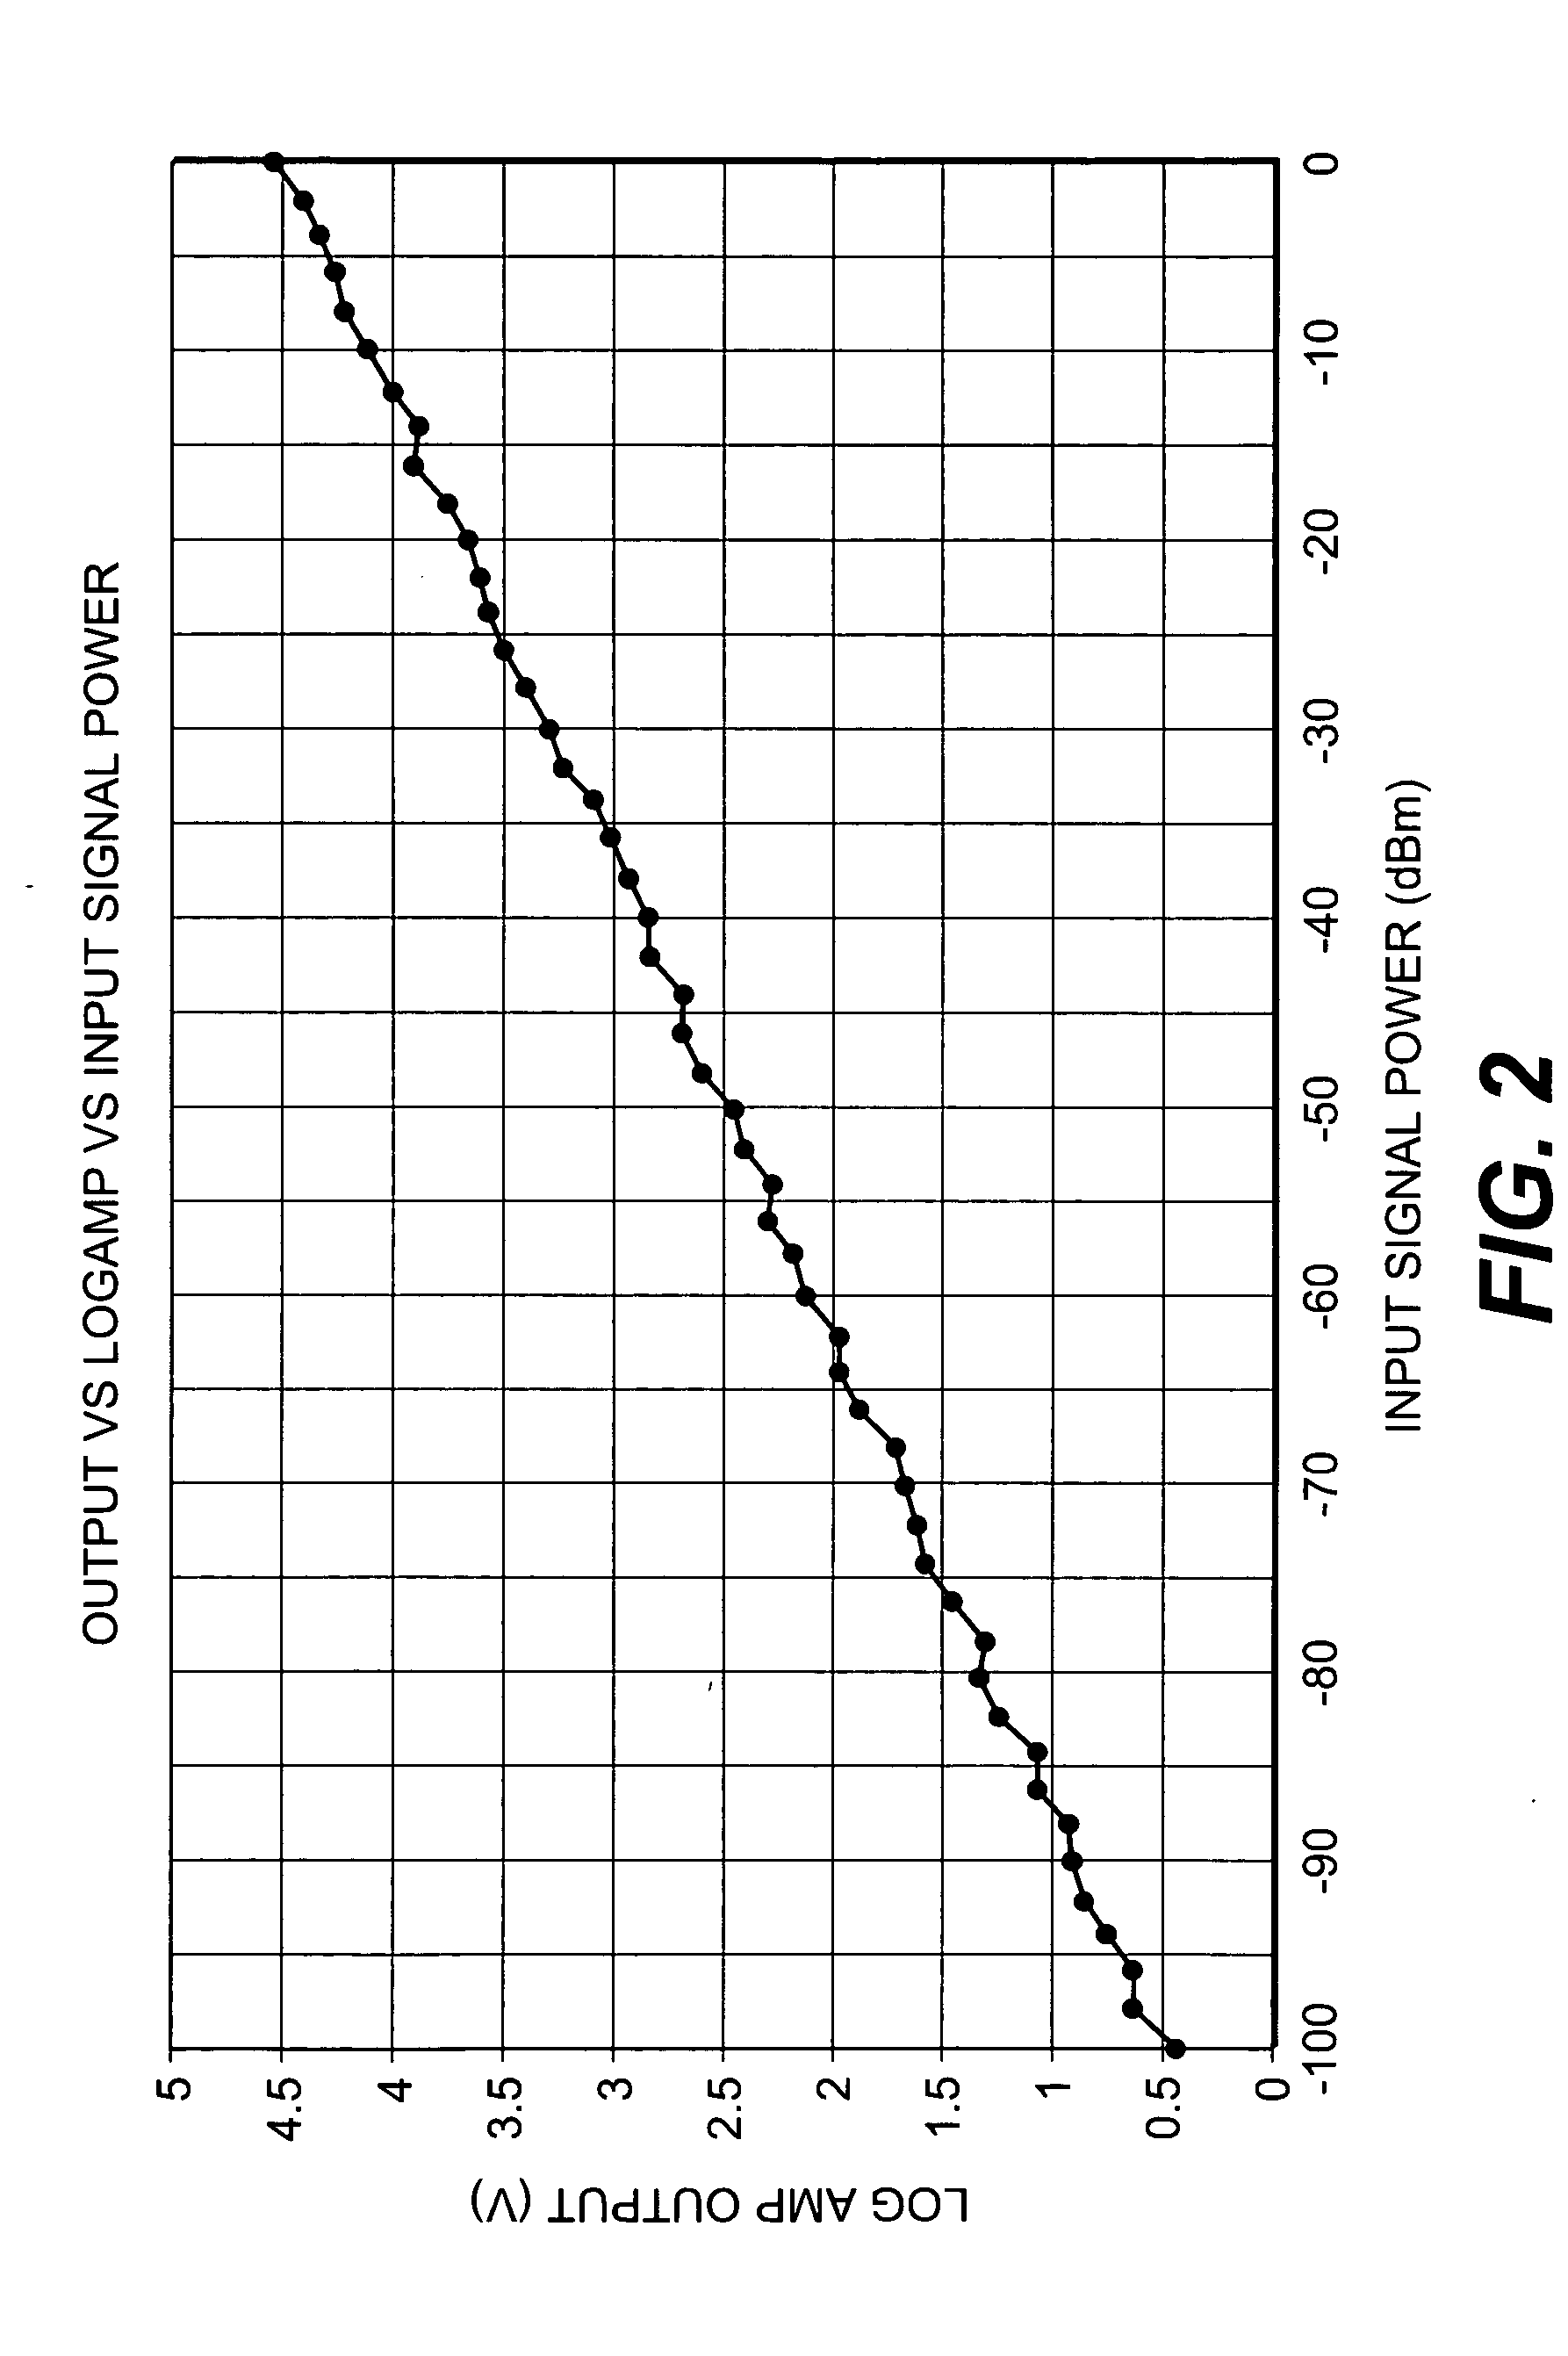 Apparatus and method for determining contact dynamics